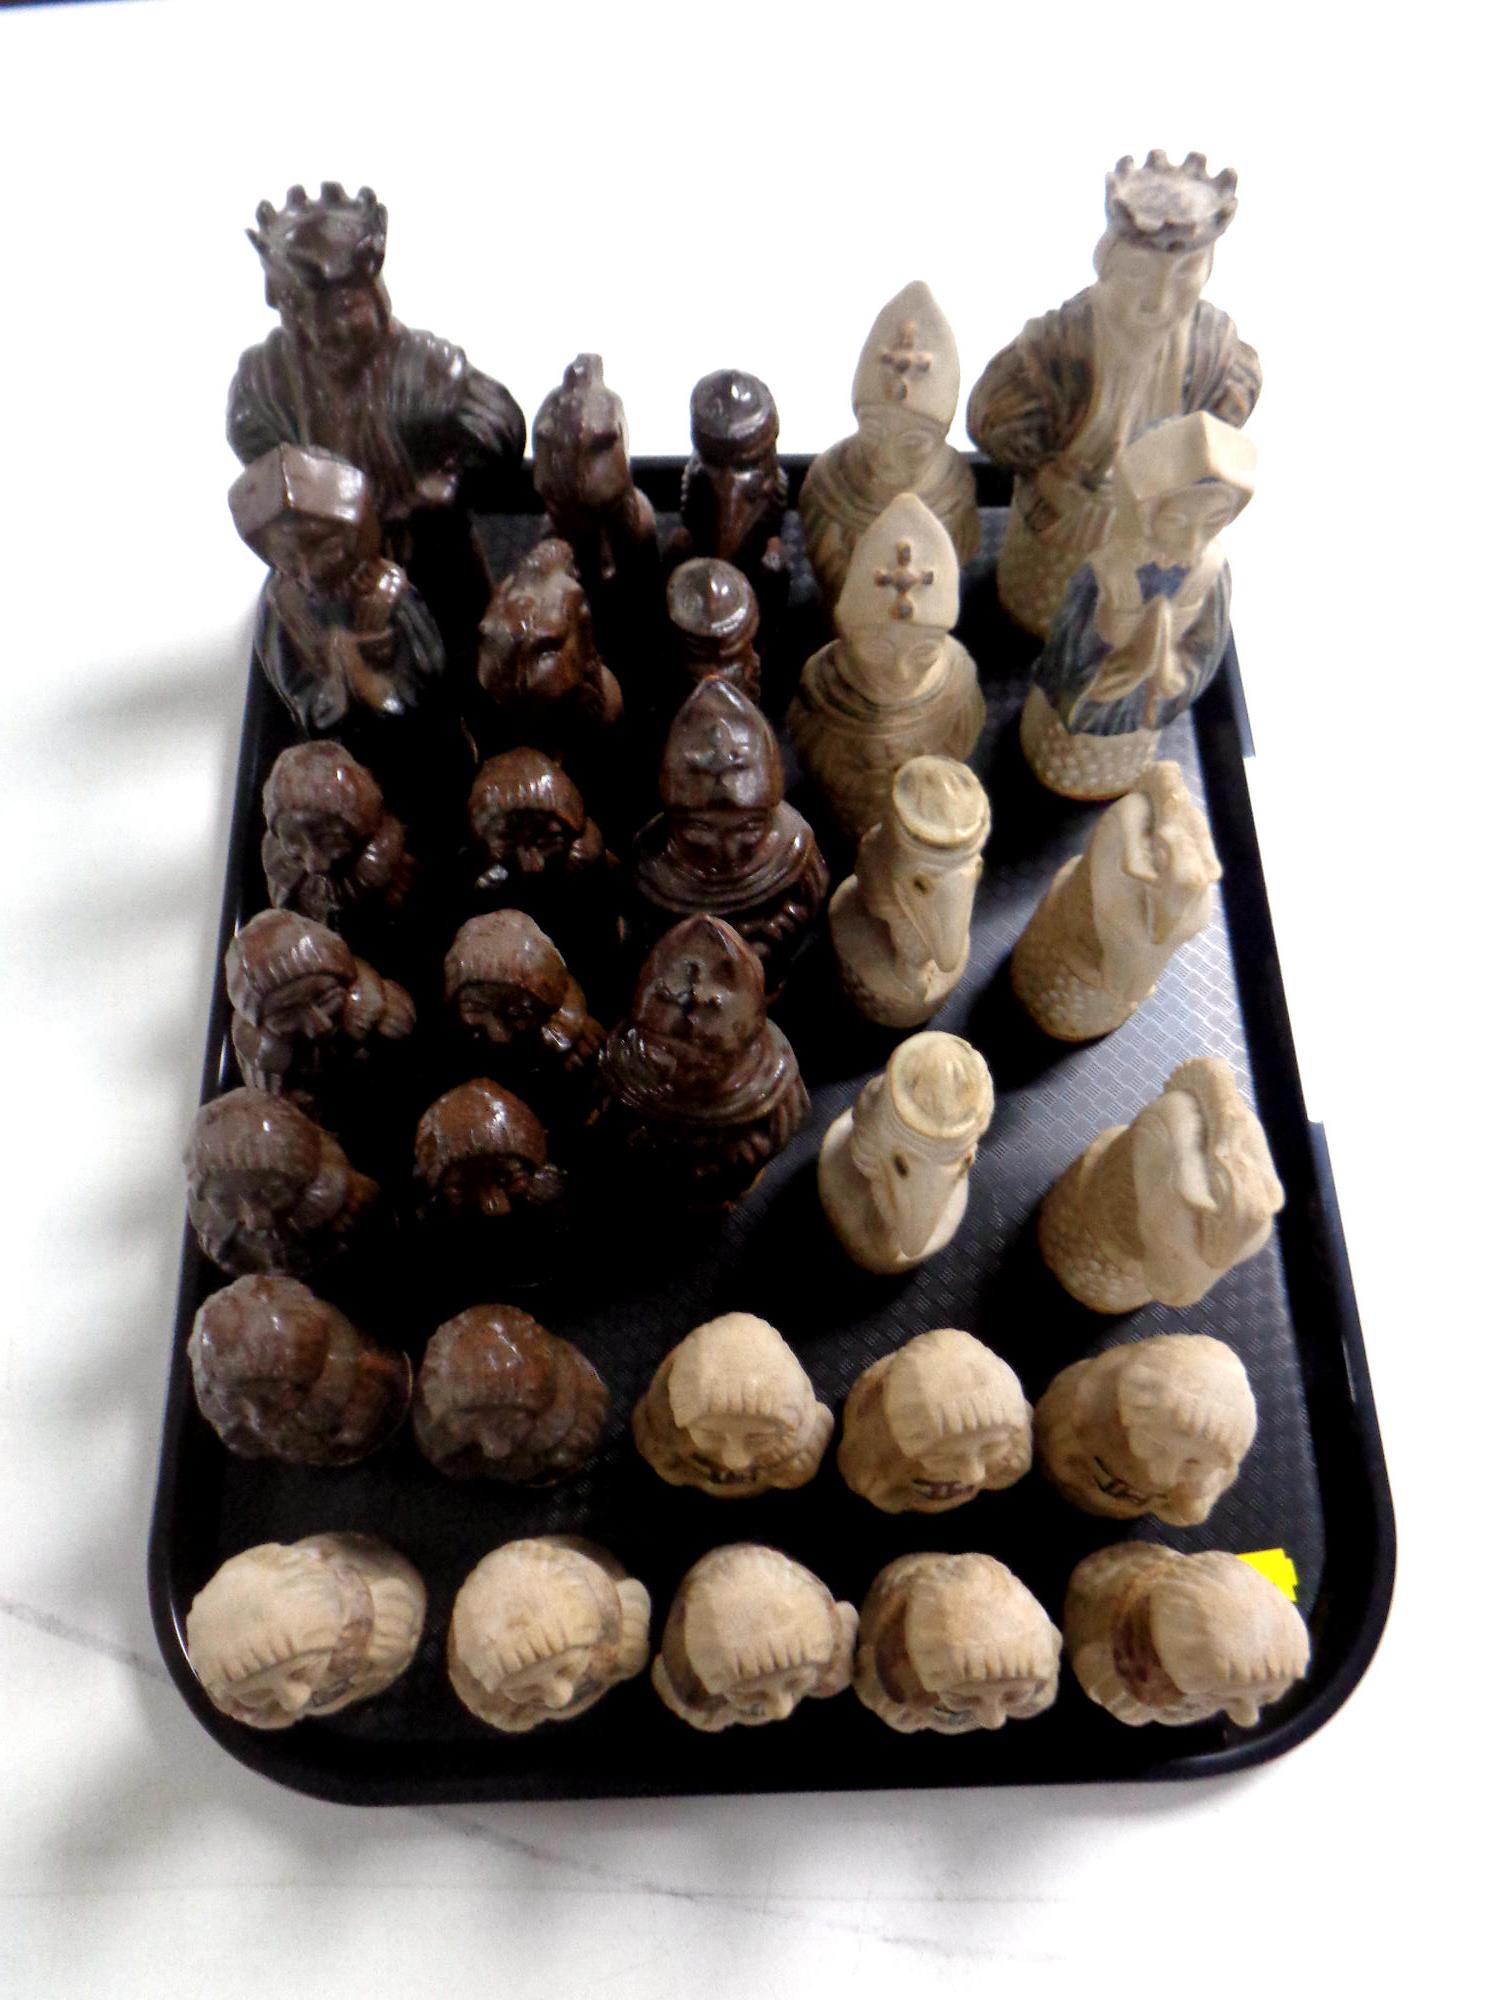 A tray of a set of pottery chess pieces.